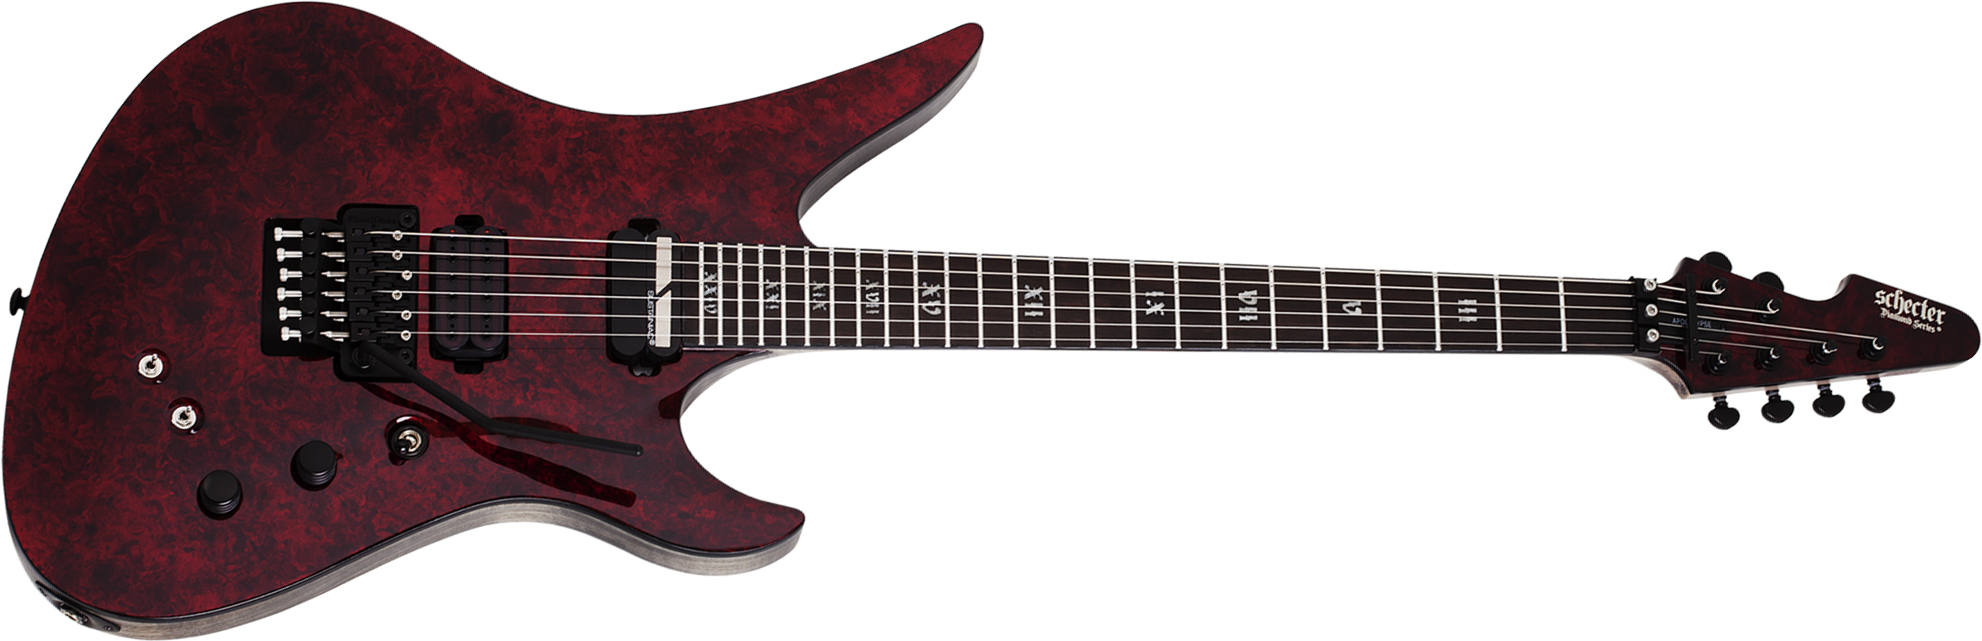 Schecter Avenger Apocalypse Fr S 2h Sustainiac Eb - Red Reign - Metal electric guitar - Main picture